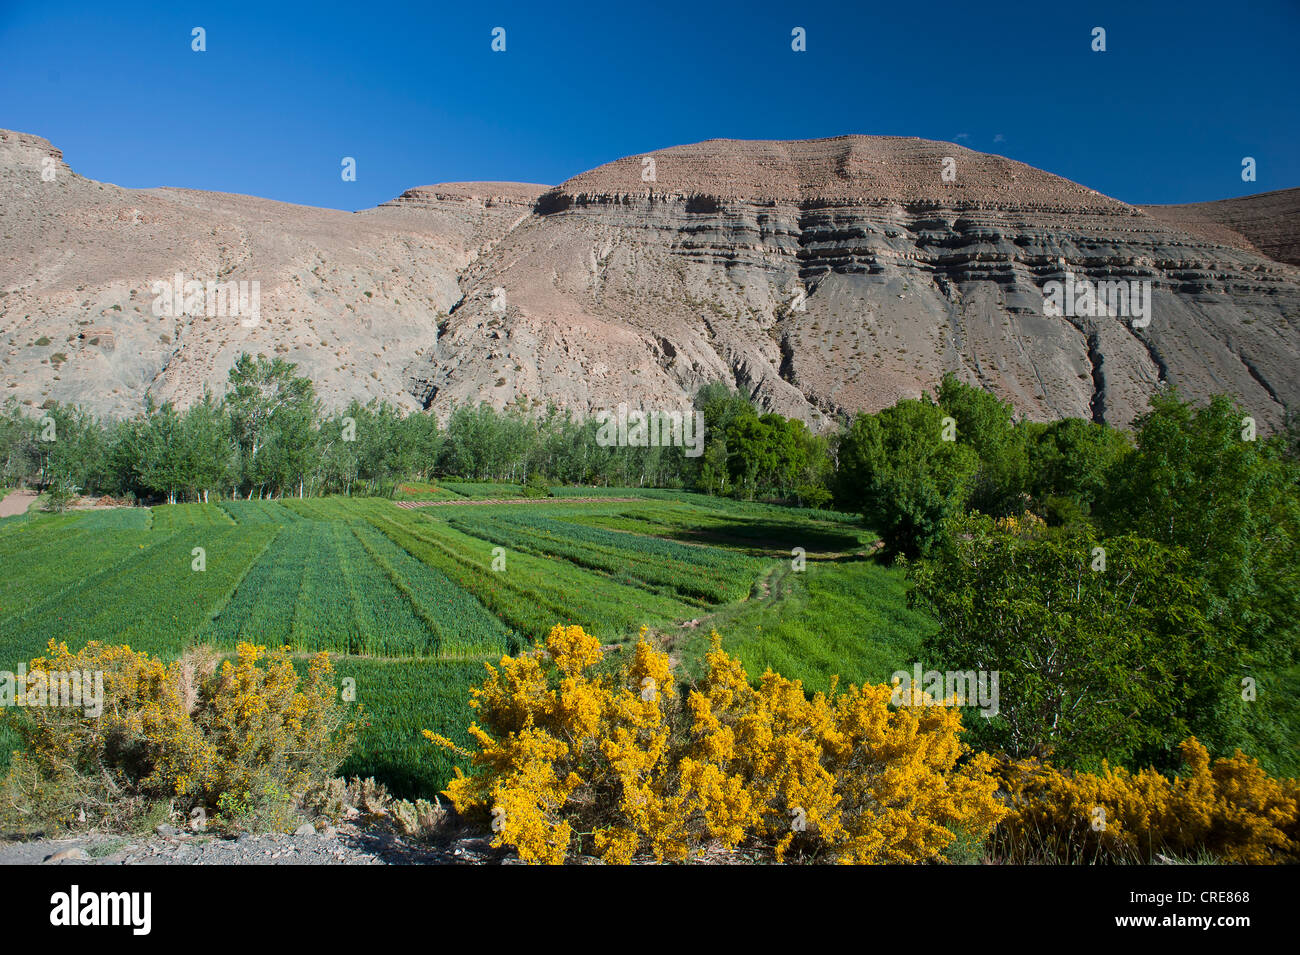 Flowering genista and green fields in front of mountain slopes characterized by erosion in the Dades Valley Stock Photo